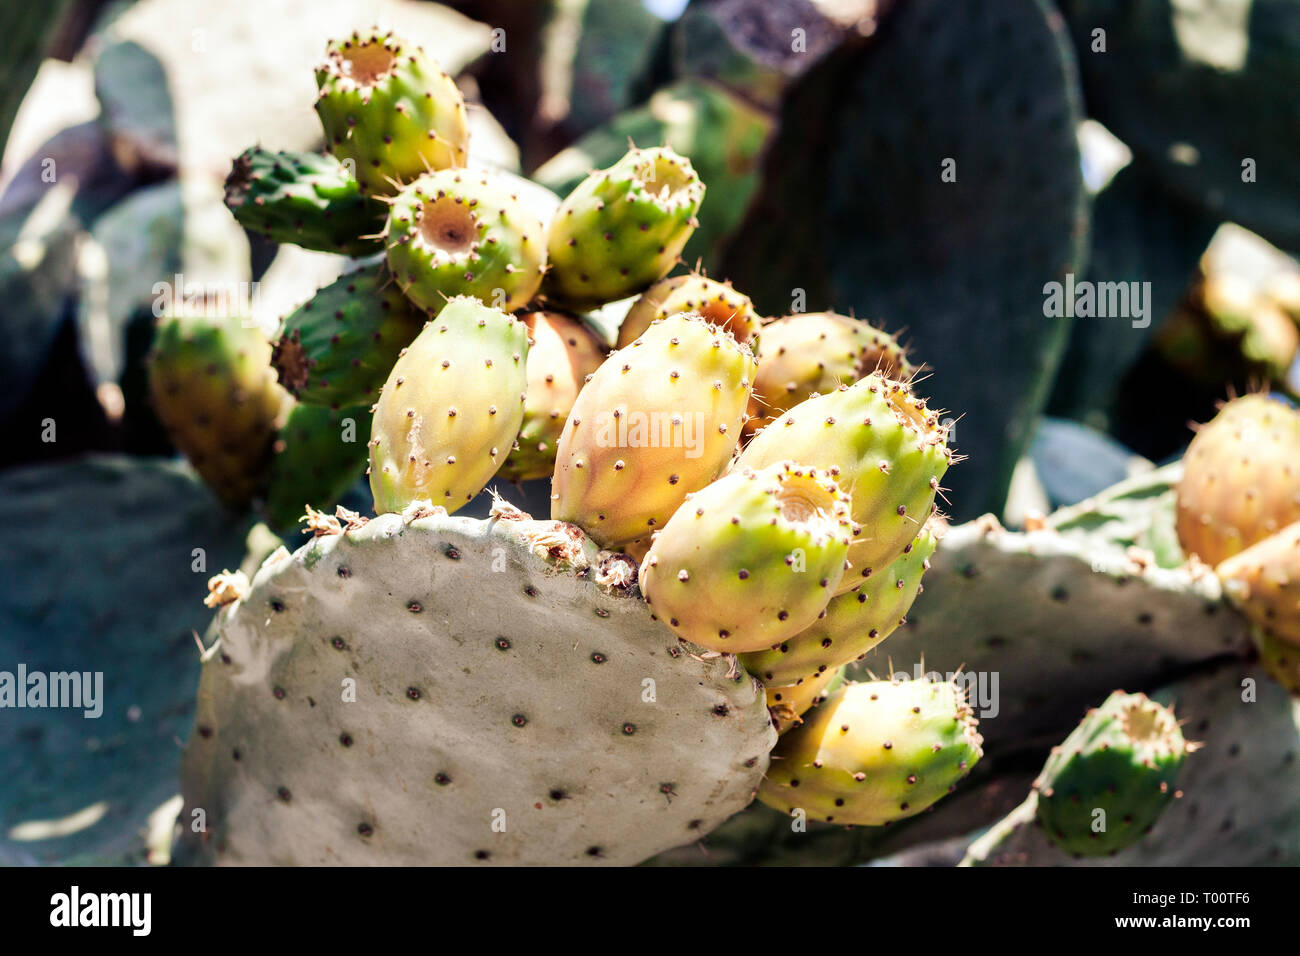 Prickly pear cactus with fruits also known as Opuntia, ficus-indica, Indian fig opuntia on the street of Catania, Sicily, Italy Stock Photo